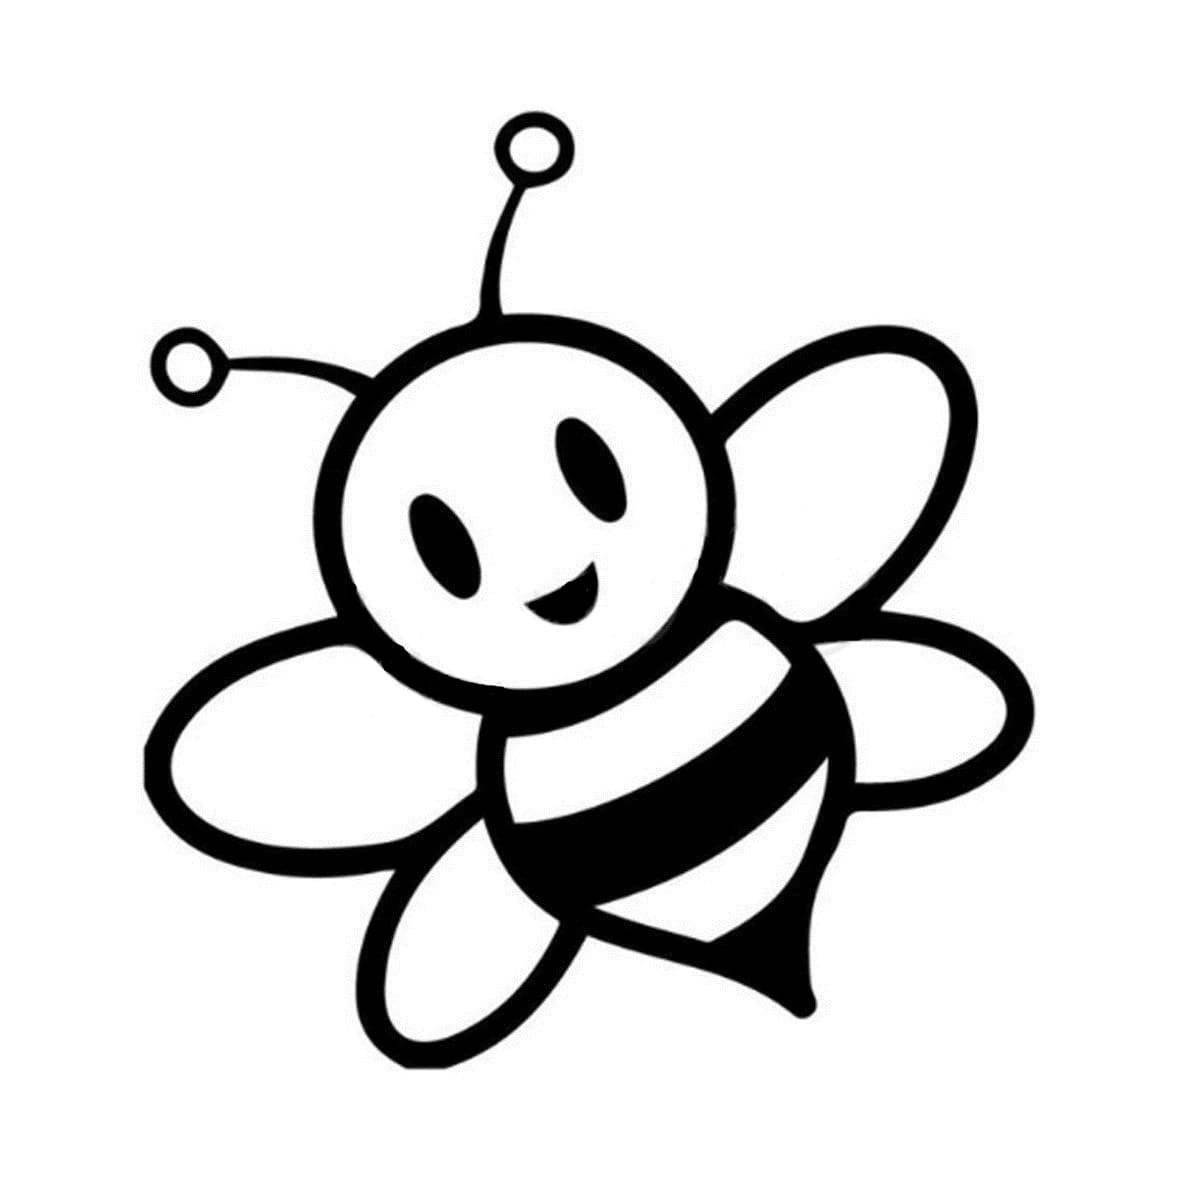 Coloring book happy bee for kids